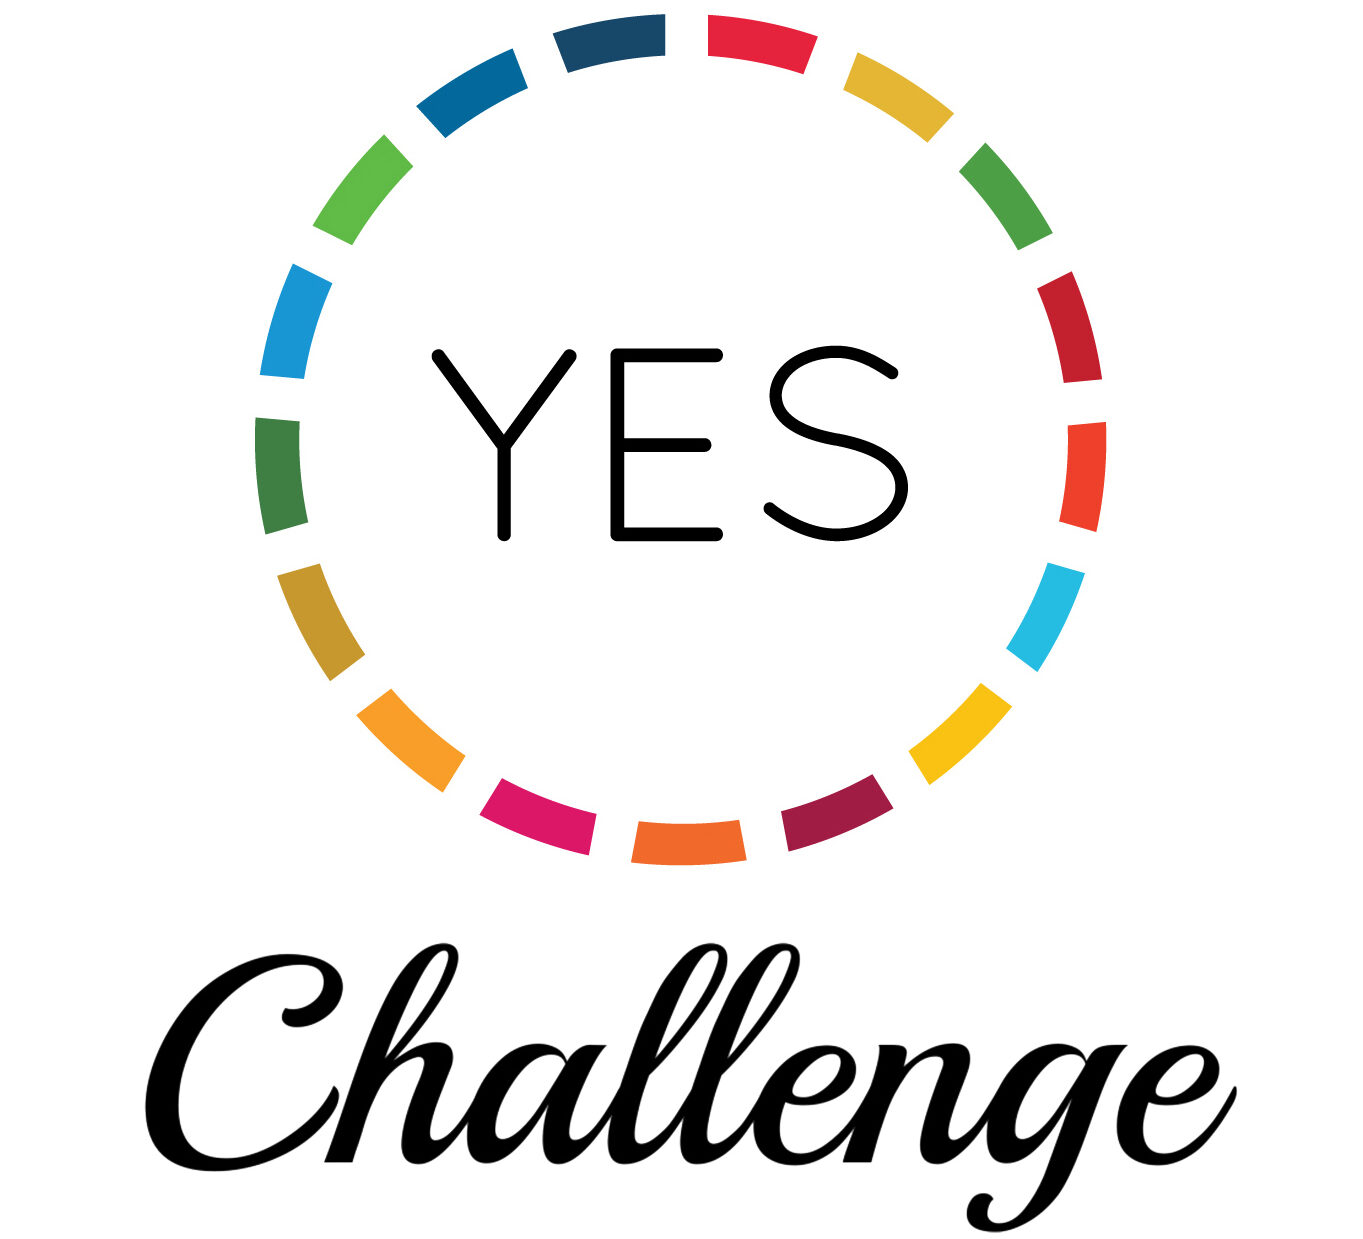 The YES Challenge – Youth Development That Works